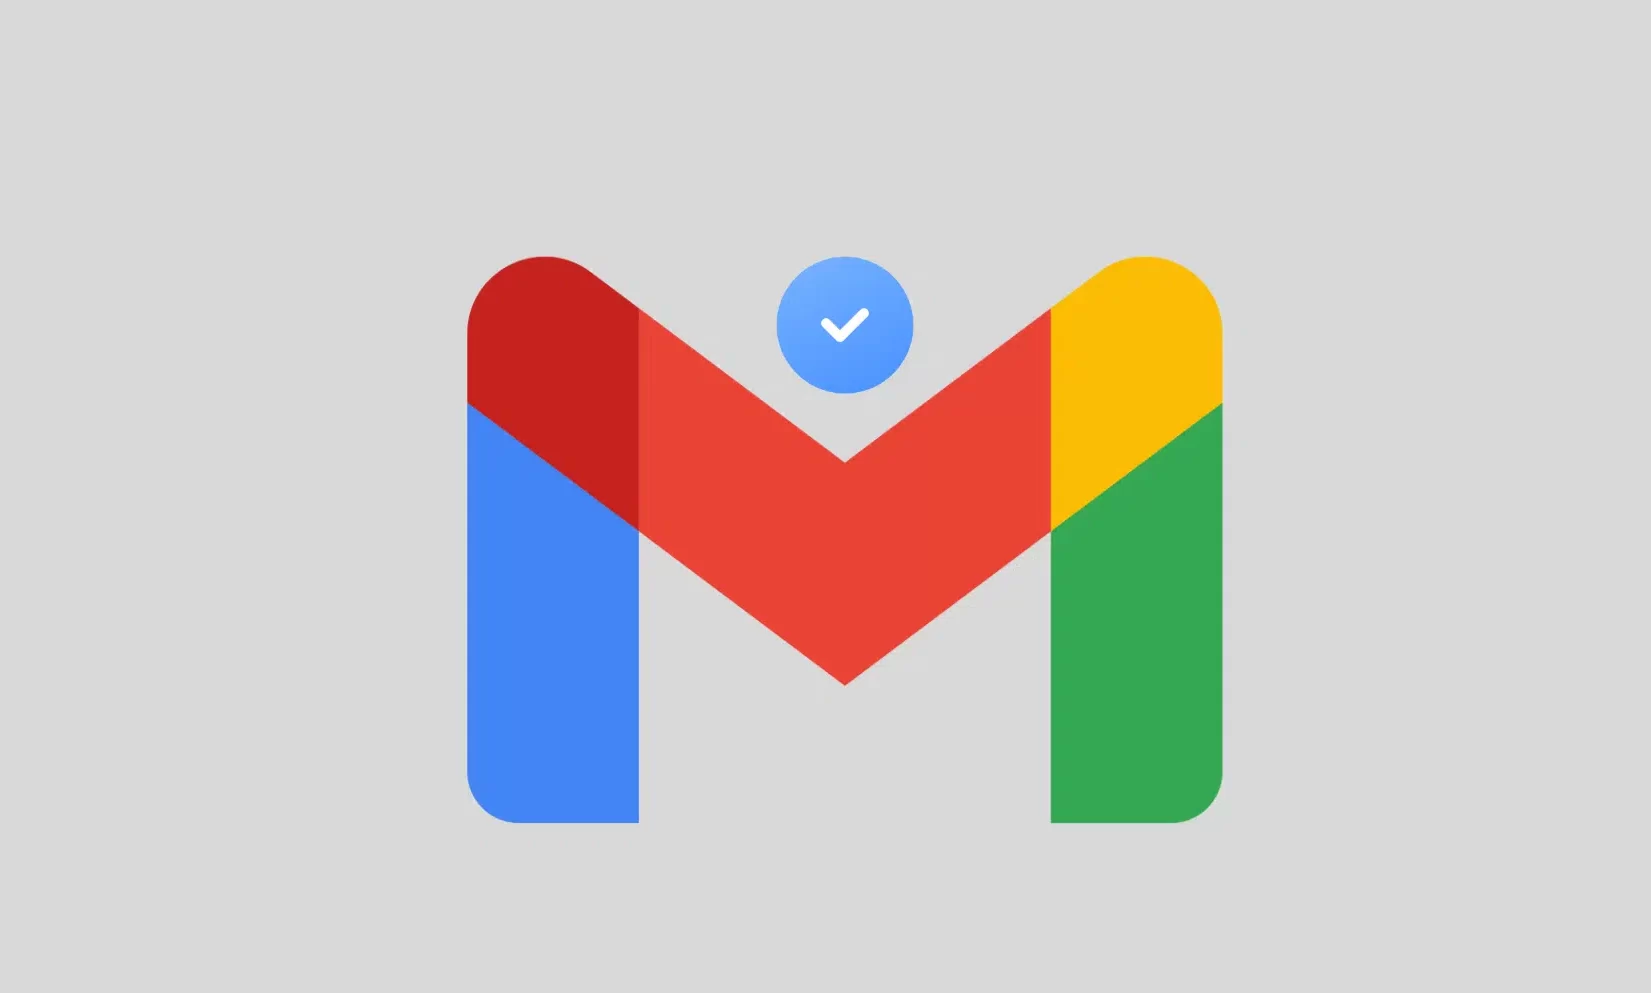 Google brings the blue verification mark to Gmail